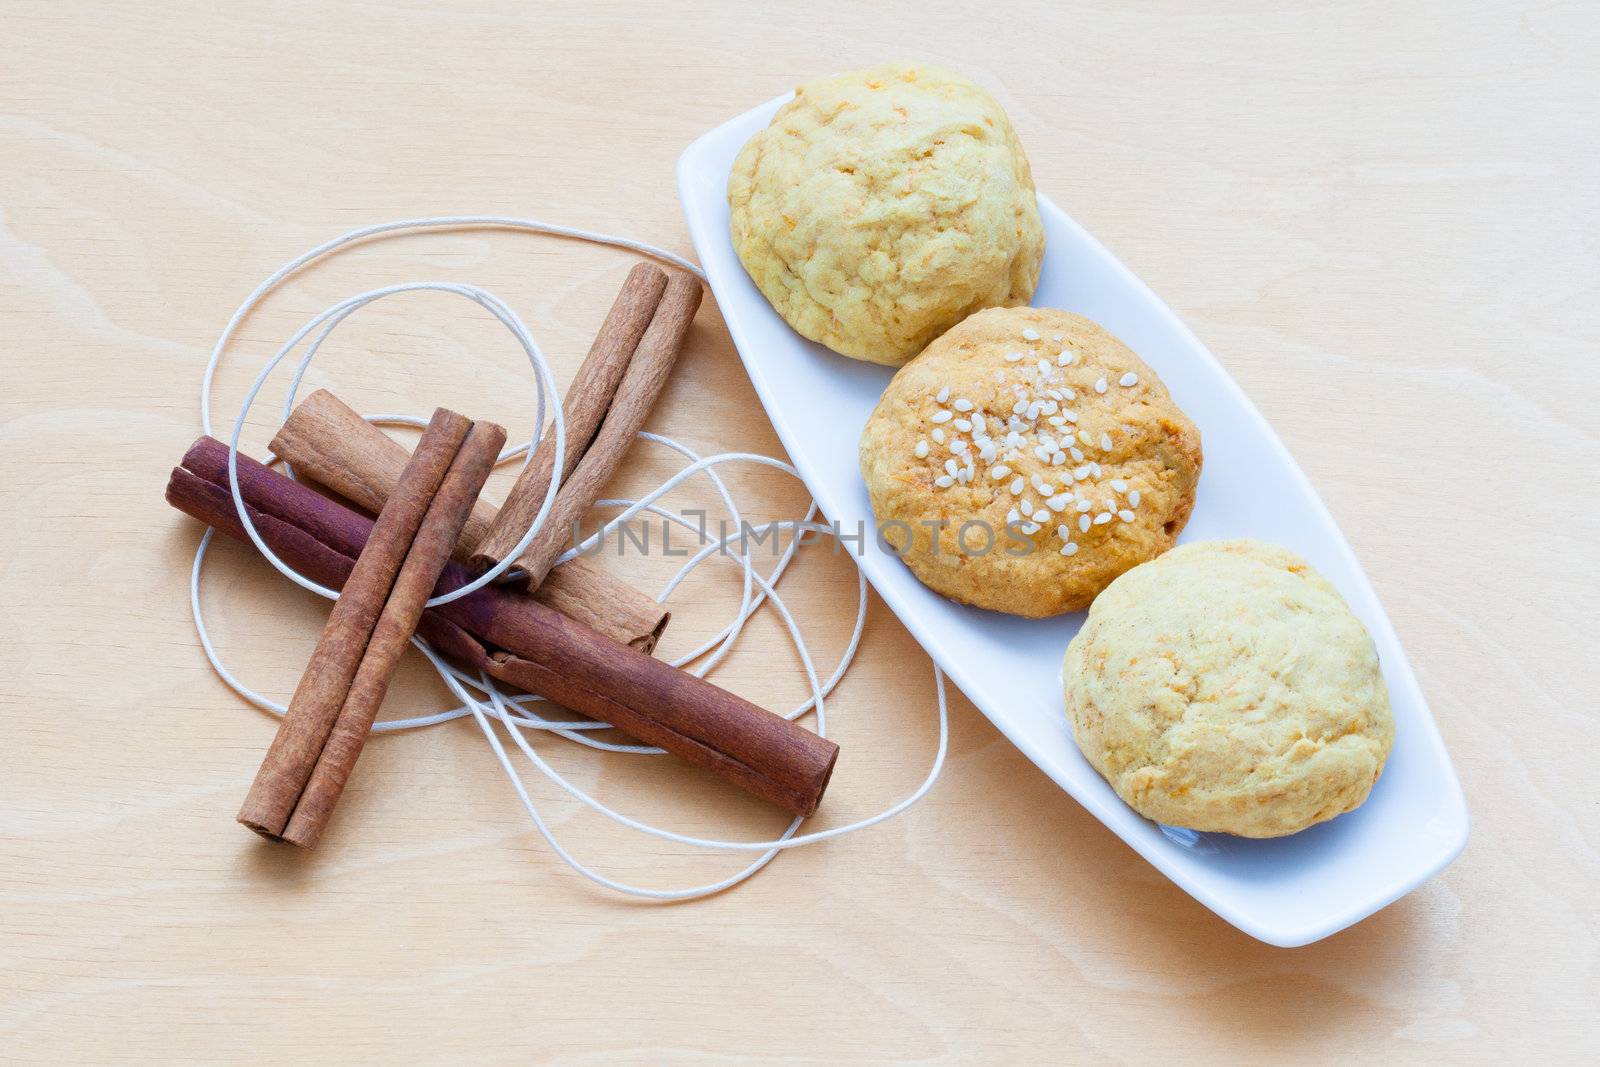 biscuits on a plate and cinnamon sticks